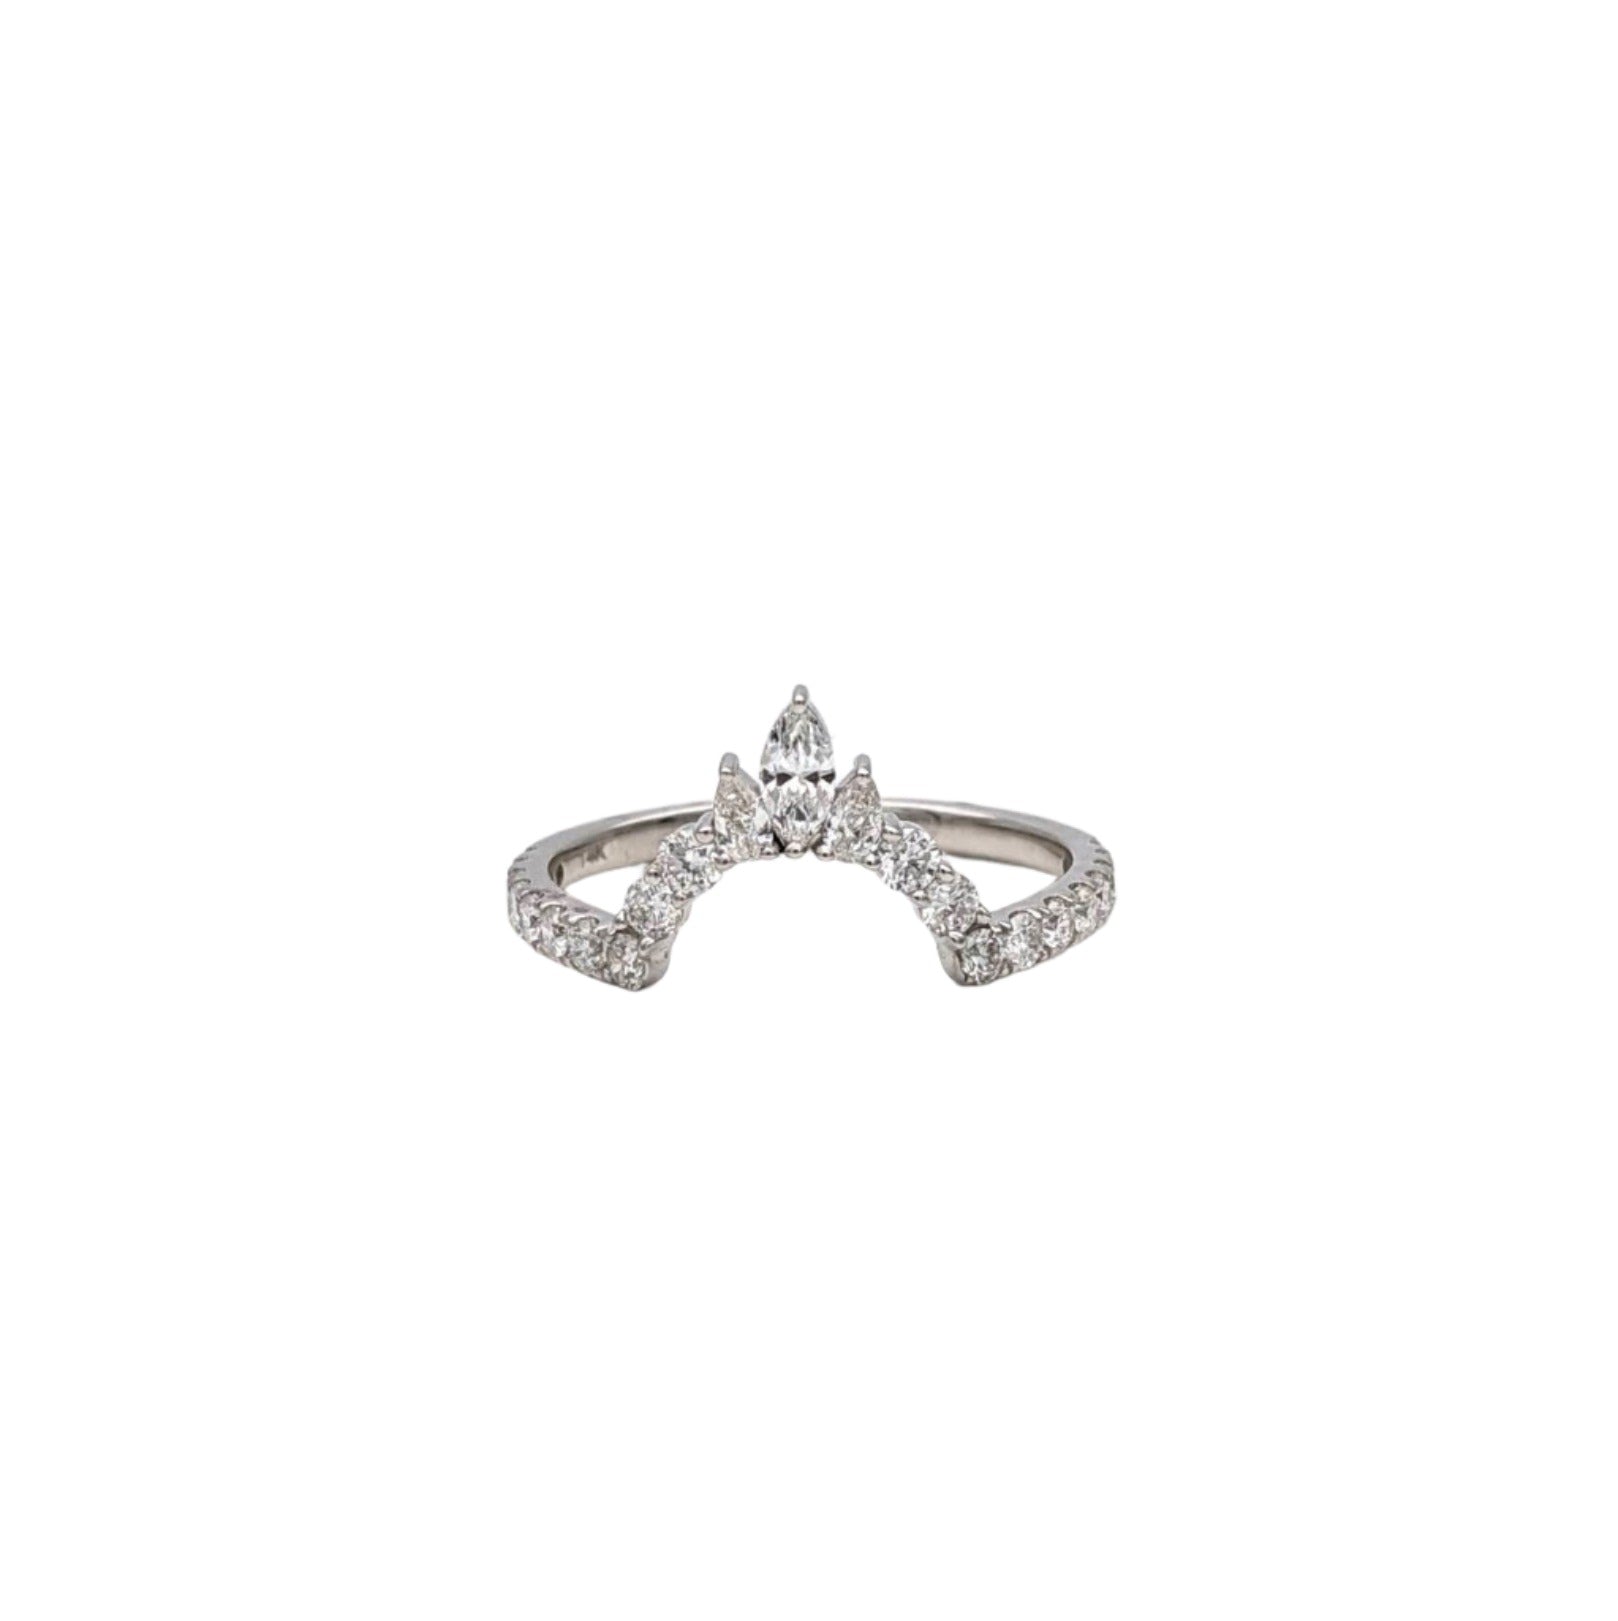 Shadow band for a Pear shape Ring in 14k Gold with round, marquise, and pear natural diamonds/ Wedding Band